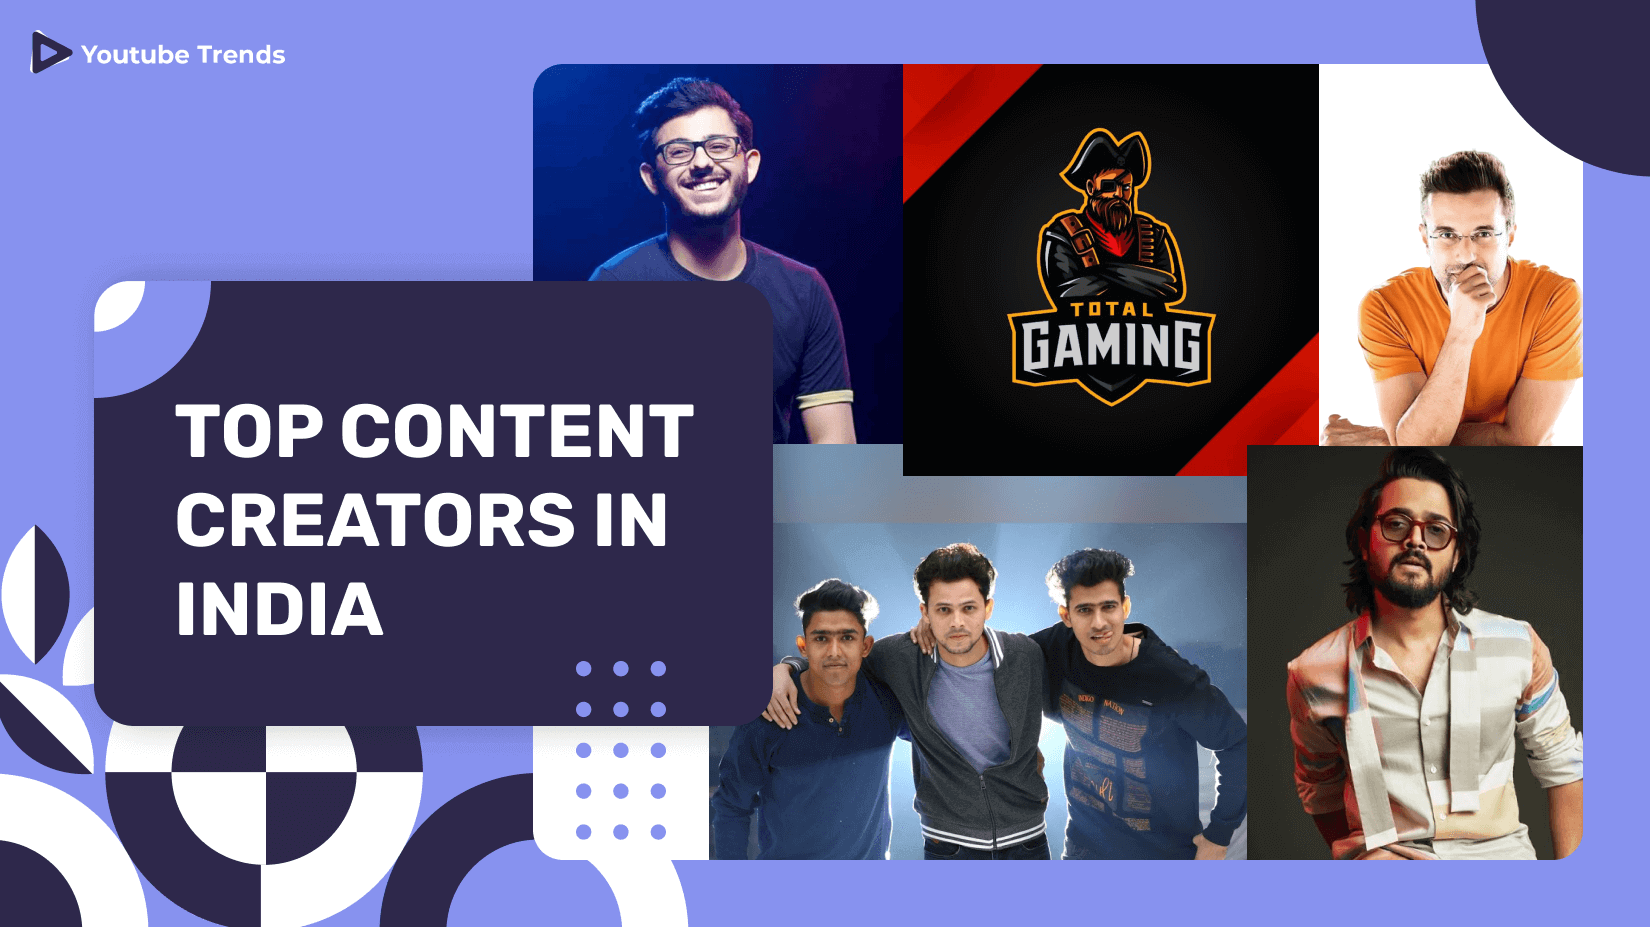 India’s YouTube Stars: The Top 5 Indian YouTube Content Creators